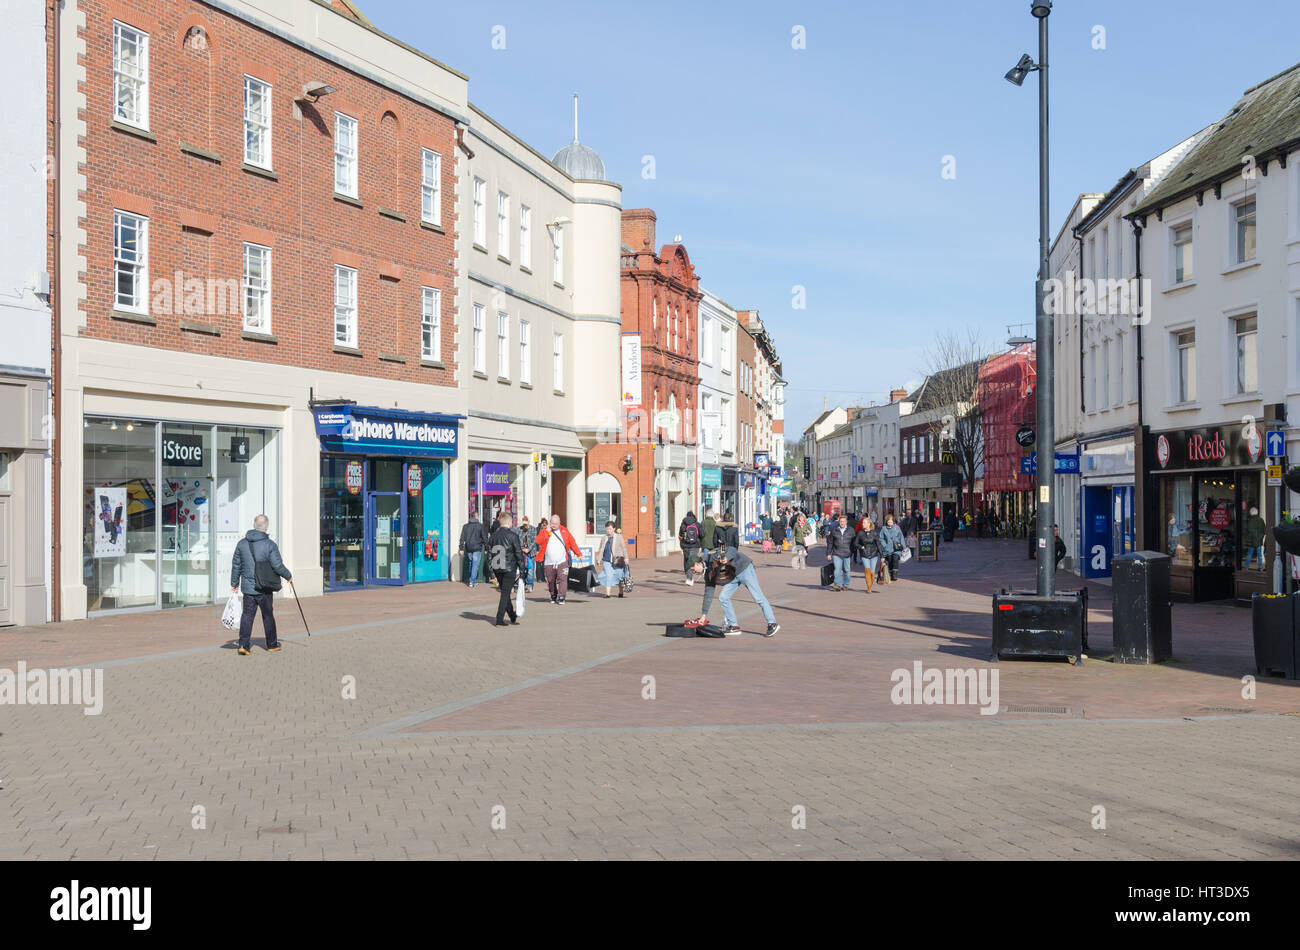 Shops and shoppers in Commercial Street in the Cathedral City of Hereford Stock Photo